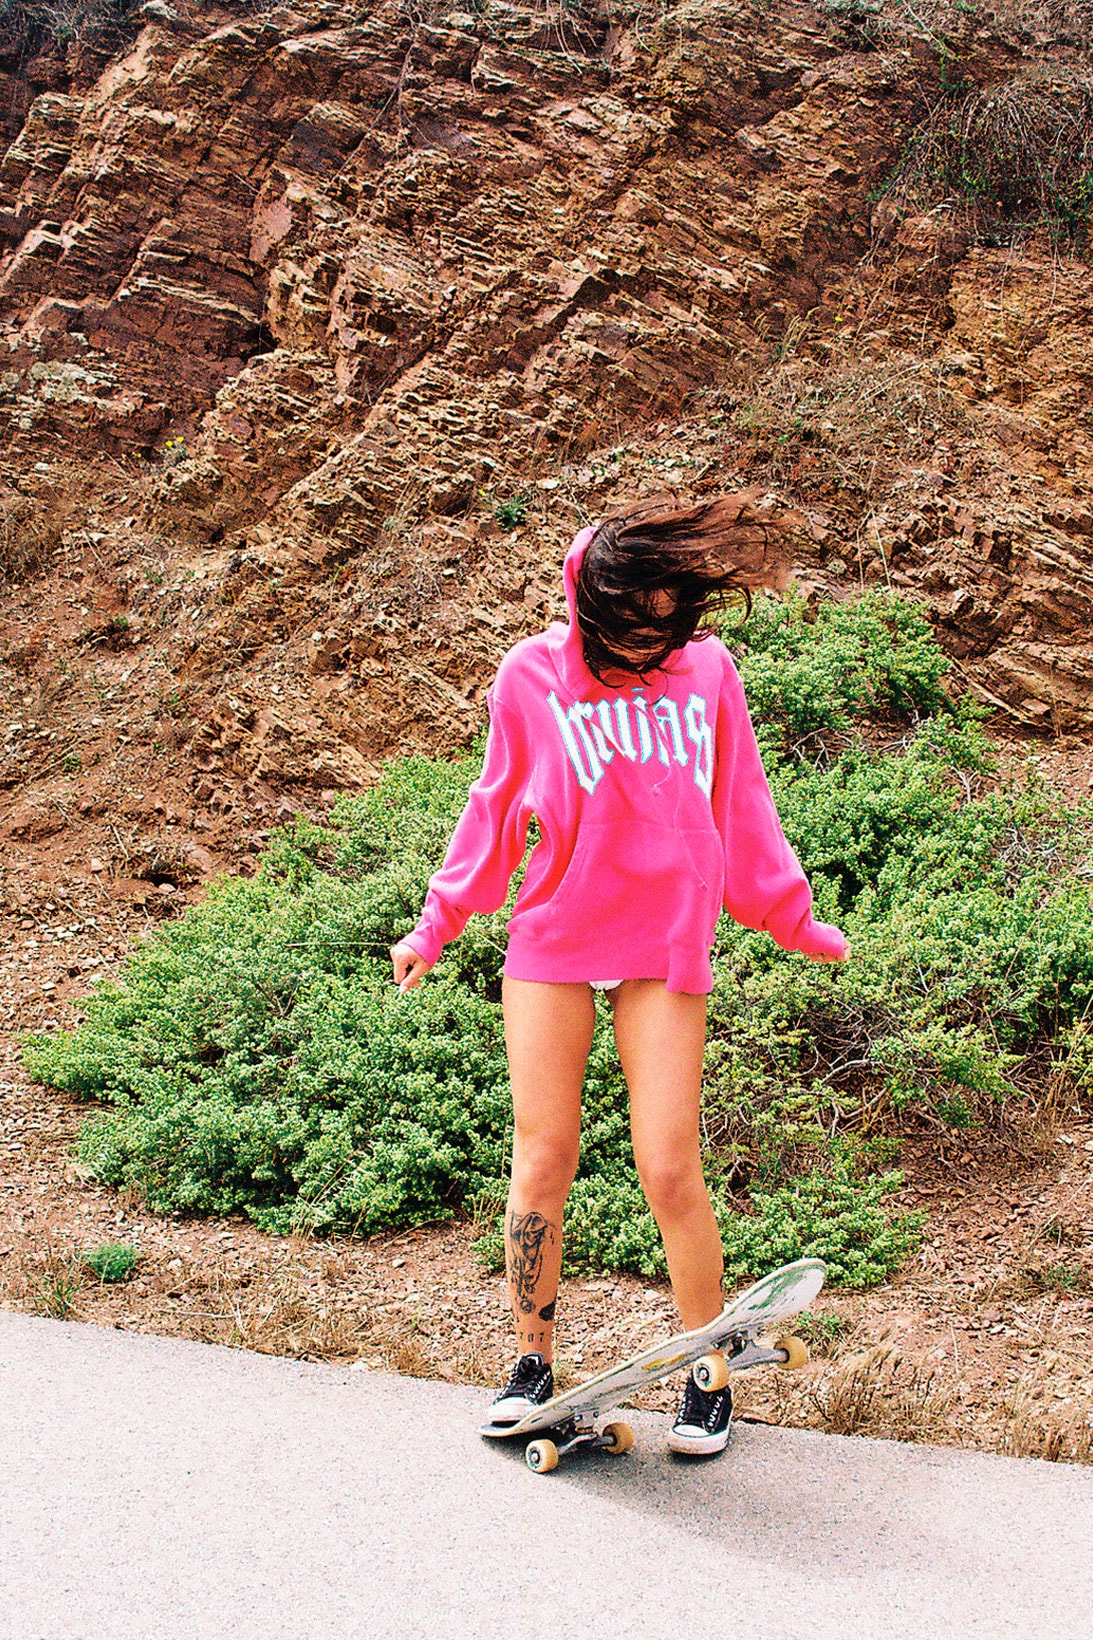 BRUJAS "WORLD SHINE" Collection neon pink hoodie